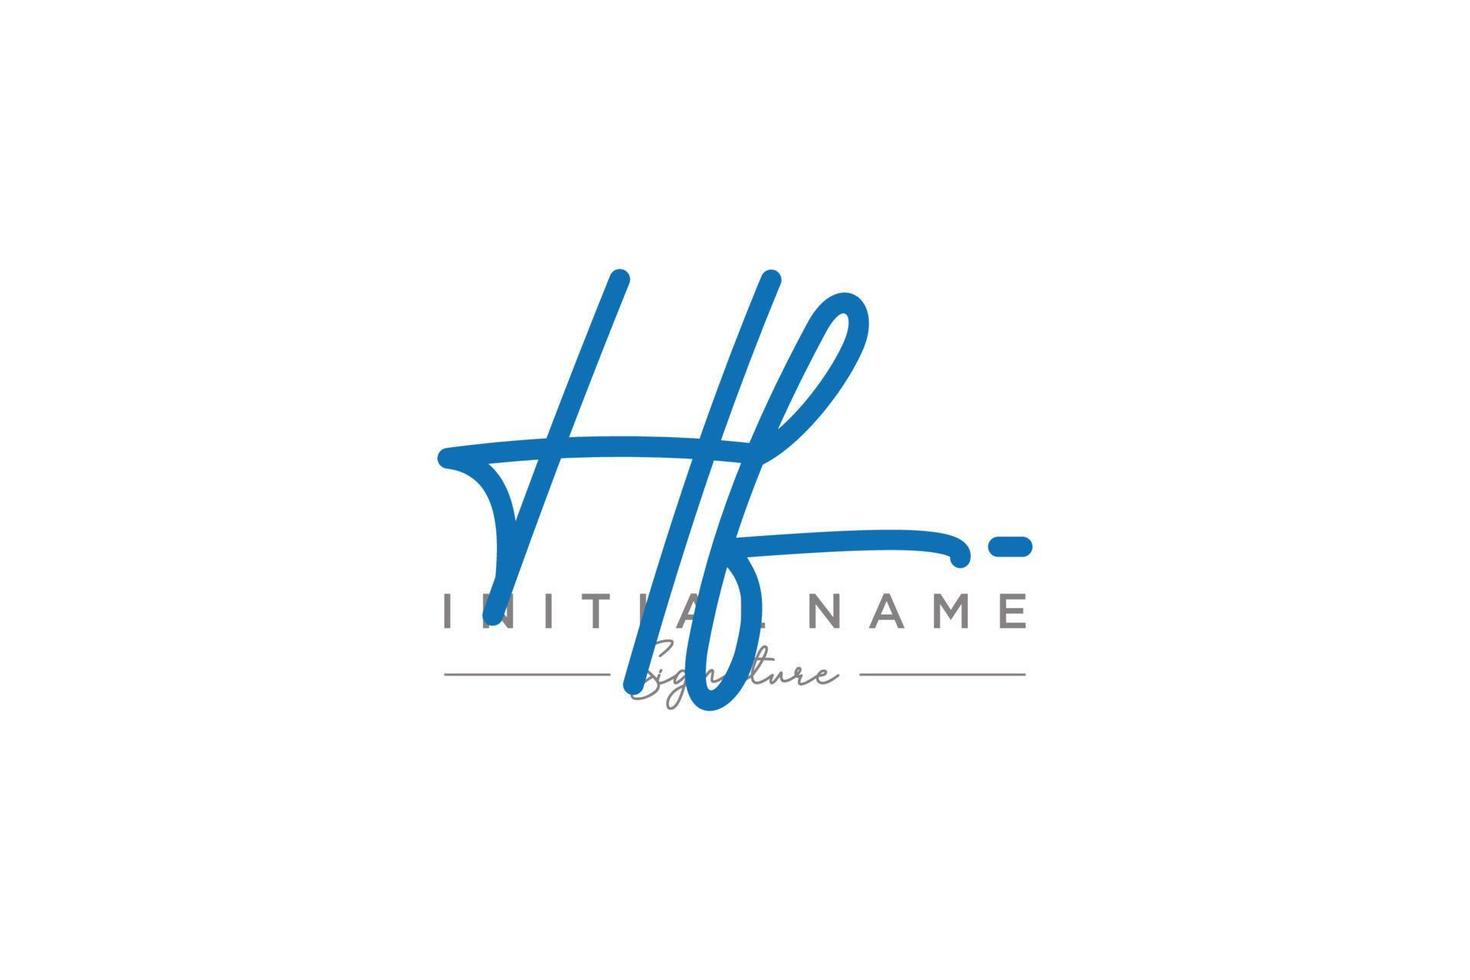 Initial HF signature logo template vector. Hand drawn Calligraphy lettering Vector illustration.